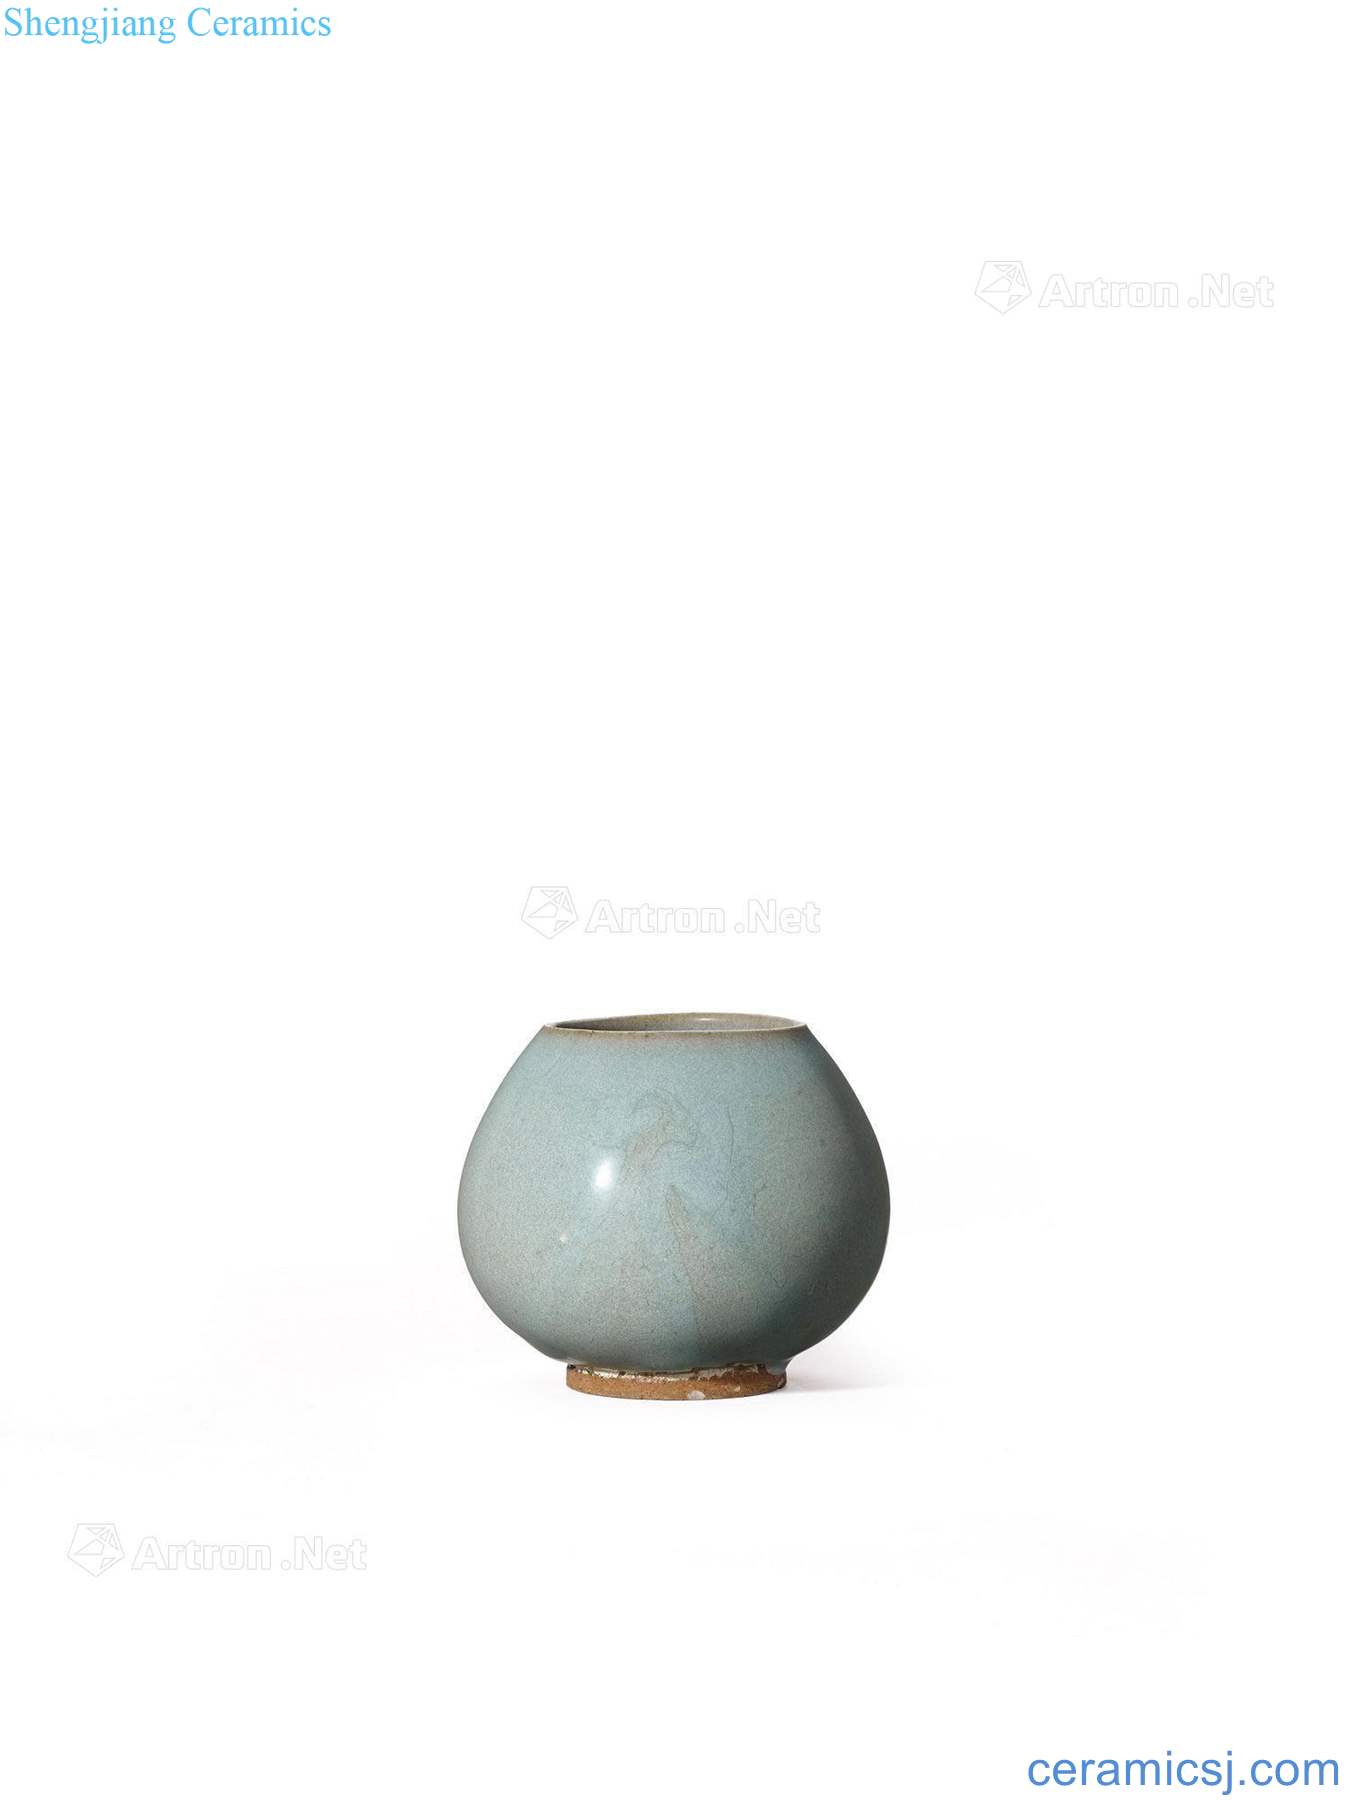 The song dynasty Sky blue glaze heart masterpieces cans